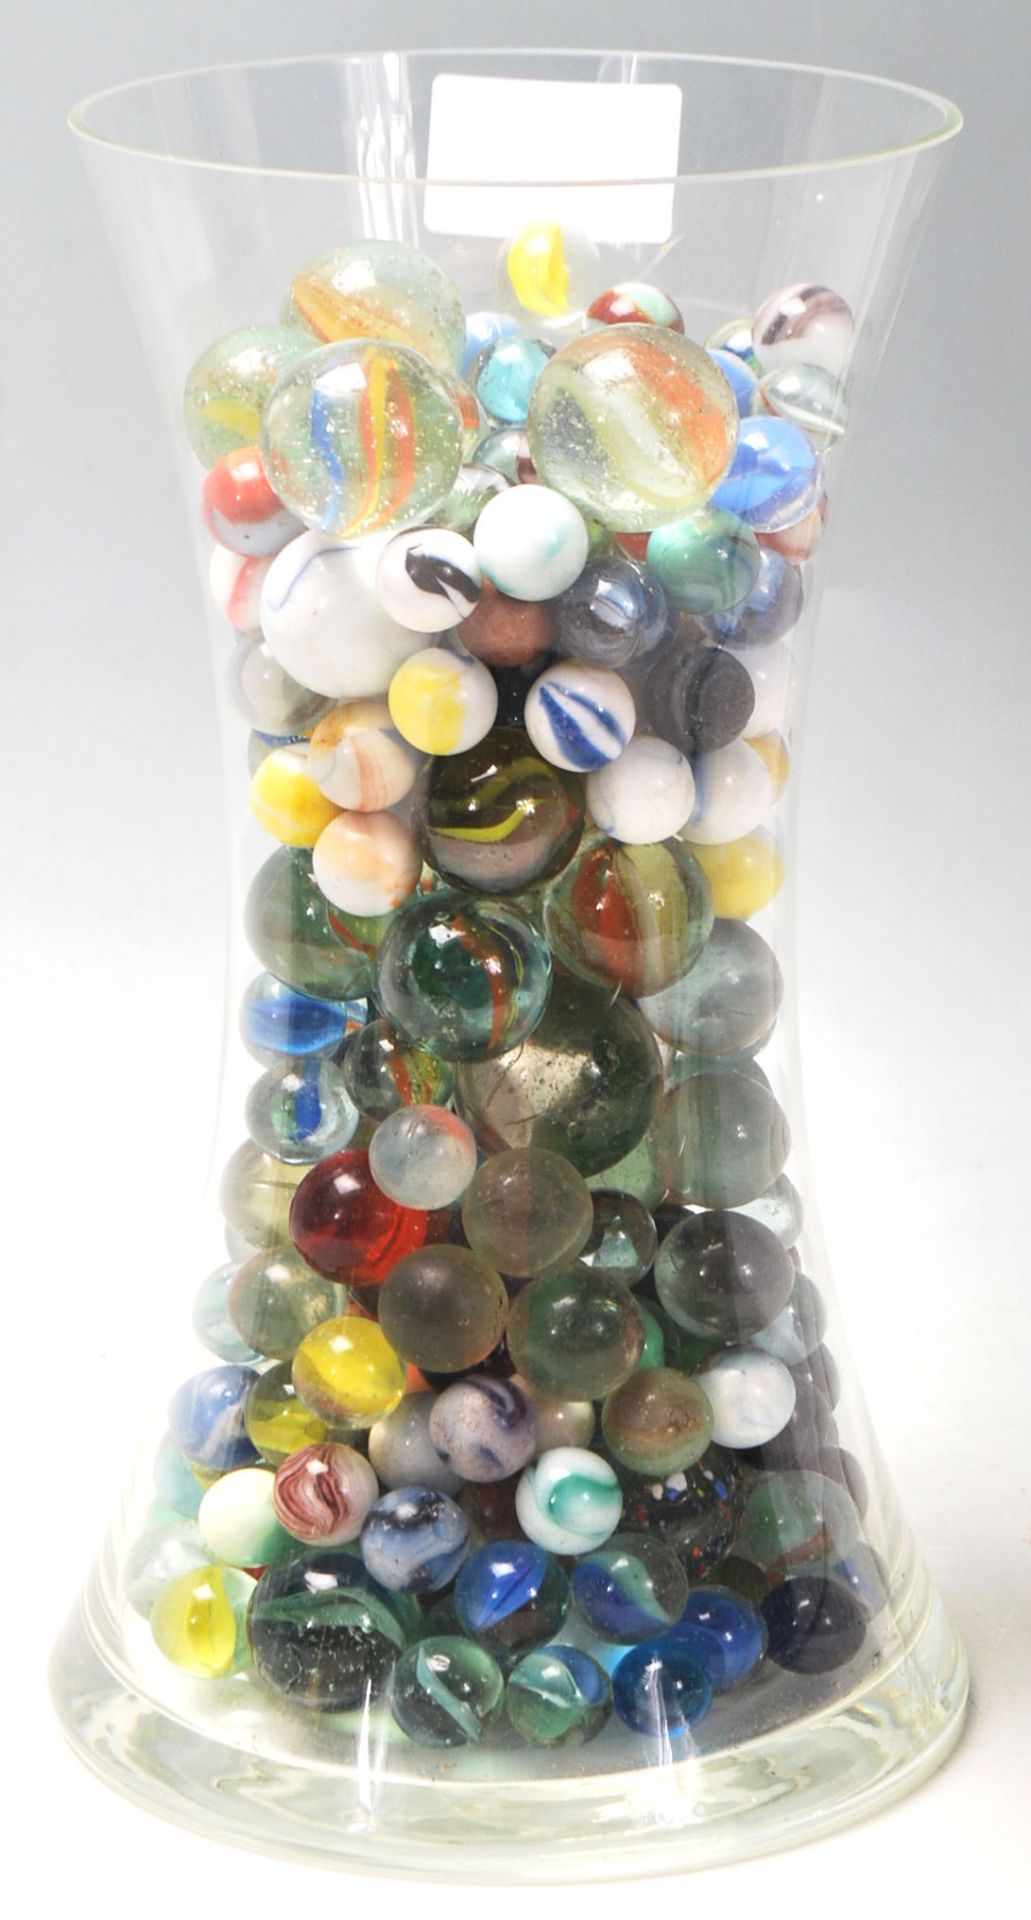 A collection of believed antique and vintage 19th and 20th century marbles to include handmade